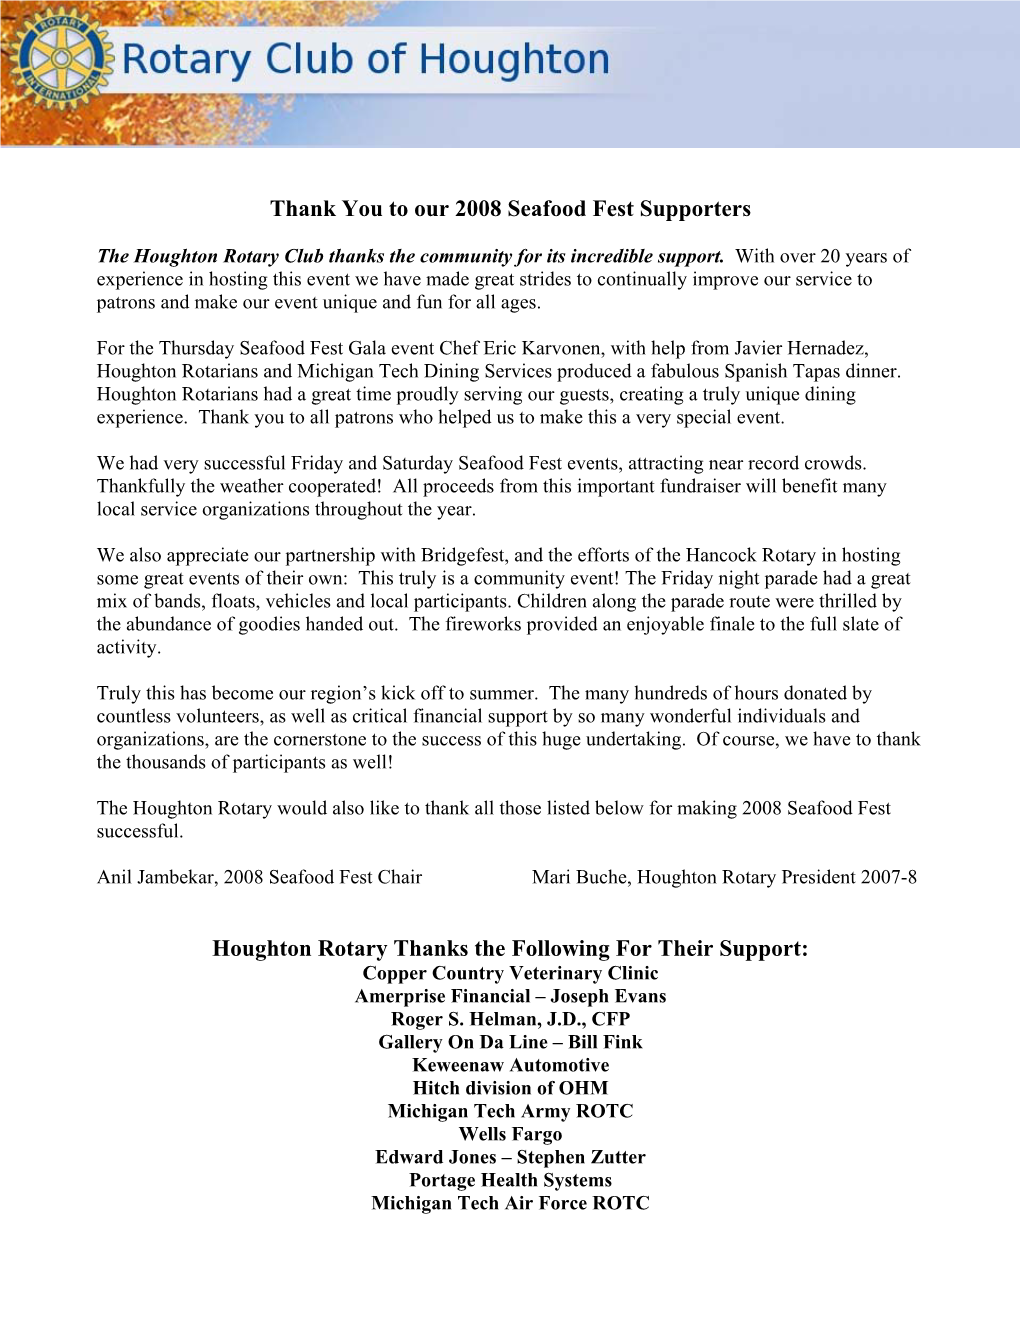 Thank You to Our 2008 Seafood Fest Supporters Houghton Rotary Thanks the Following for Their Support